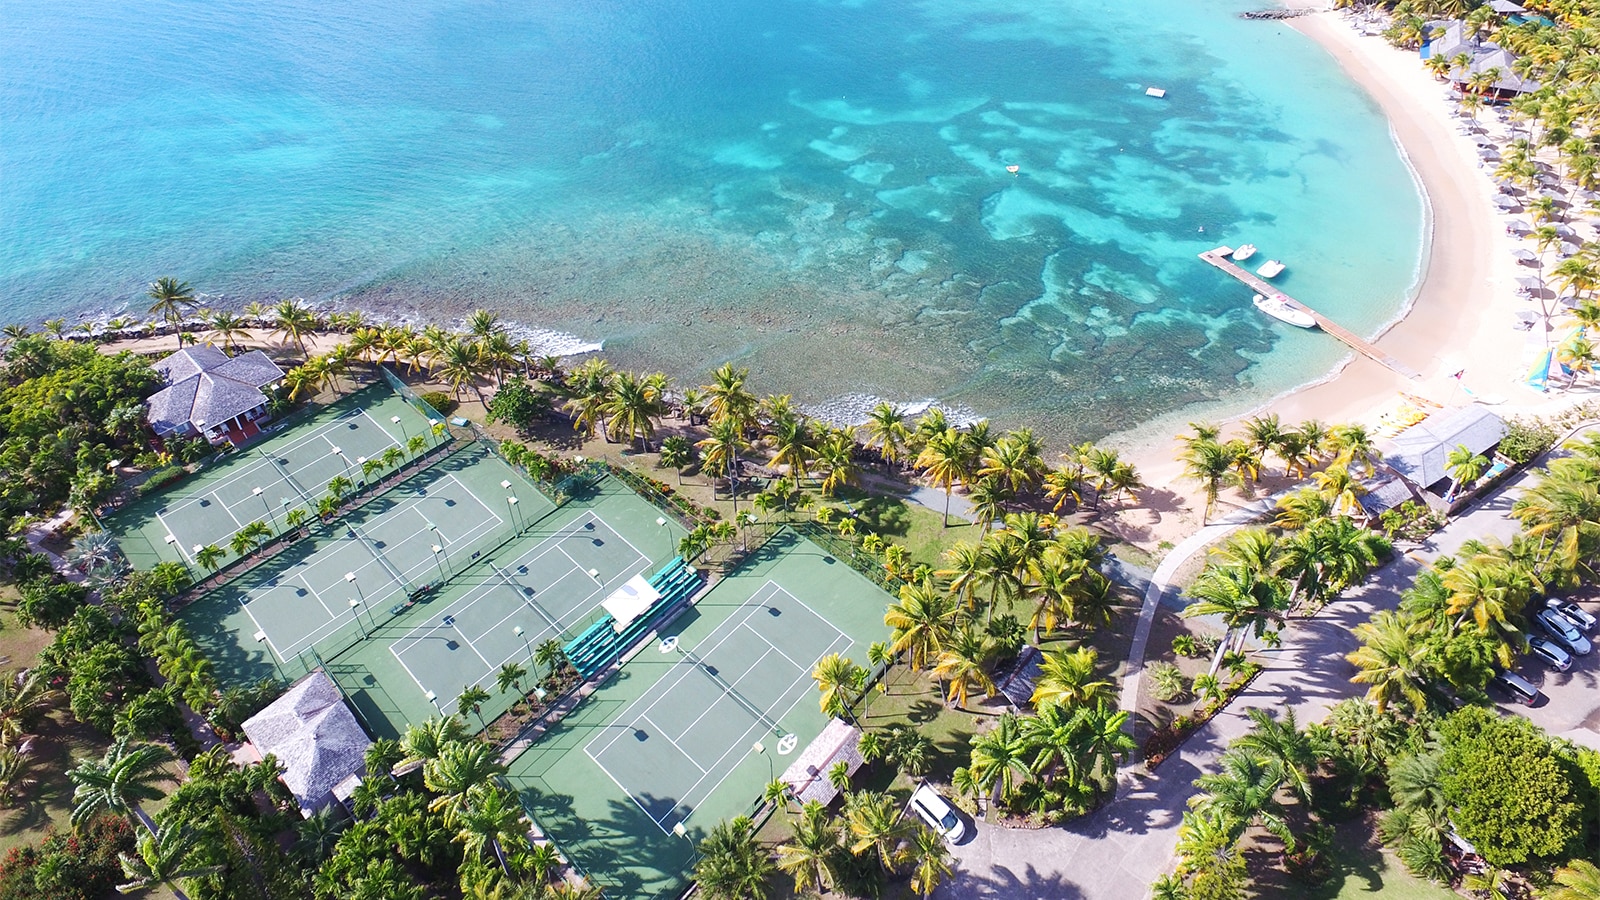 Breakpoint! Five Tennis Academies To Travel To This Summer | The Journal |  MR PORTER